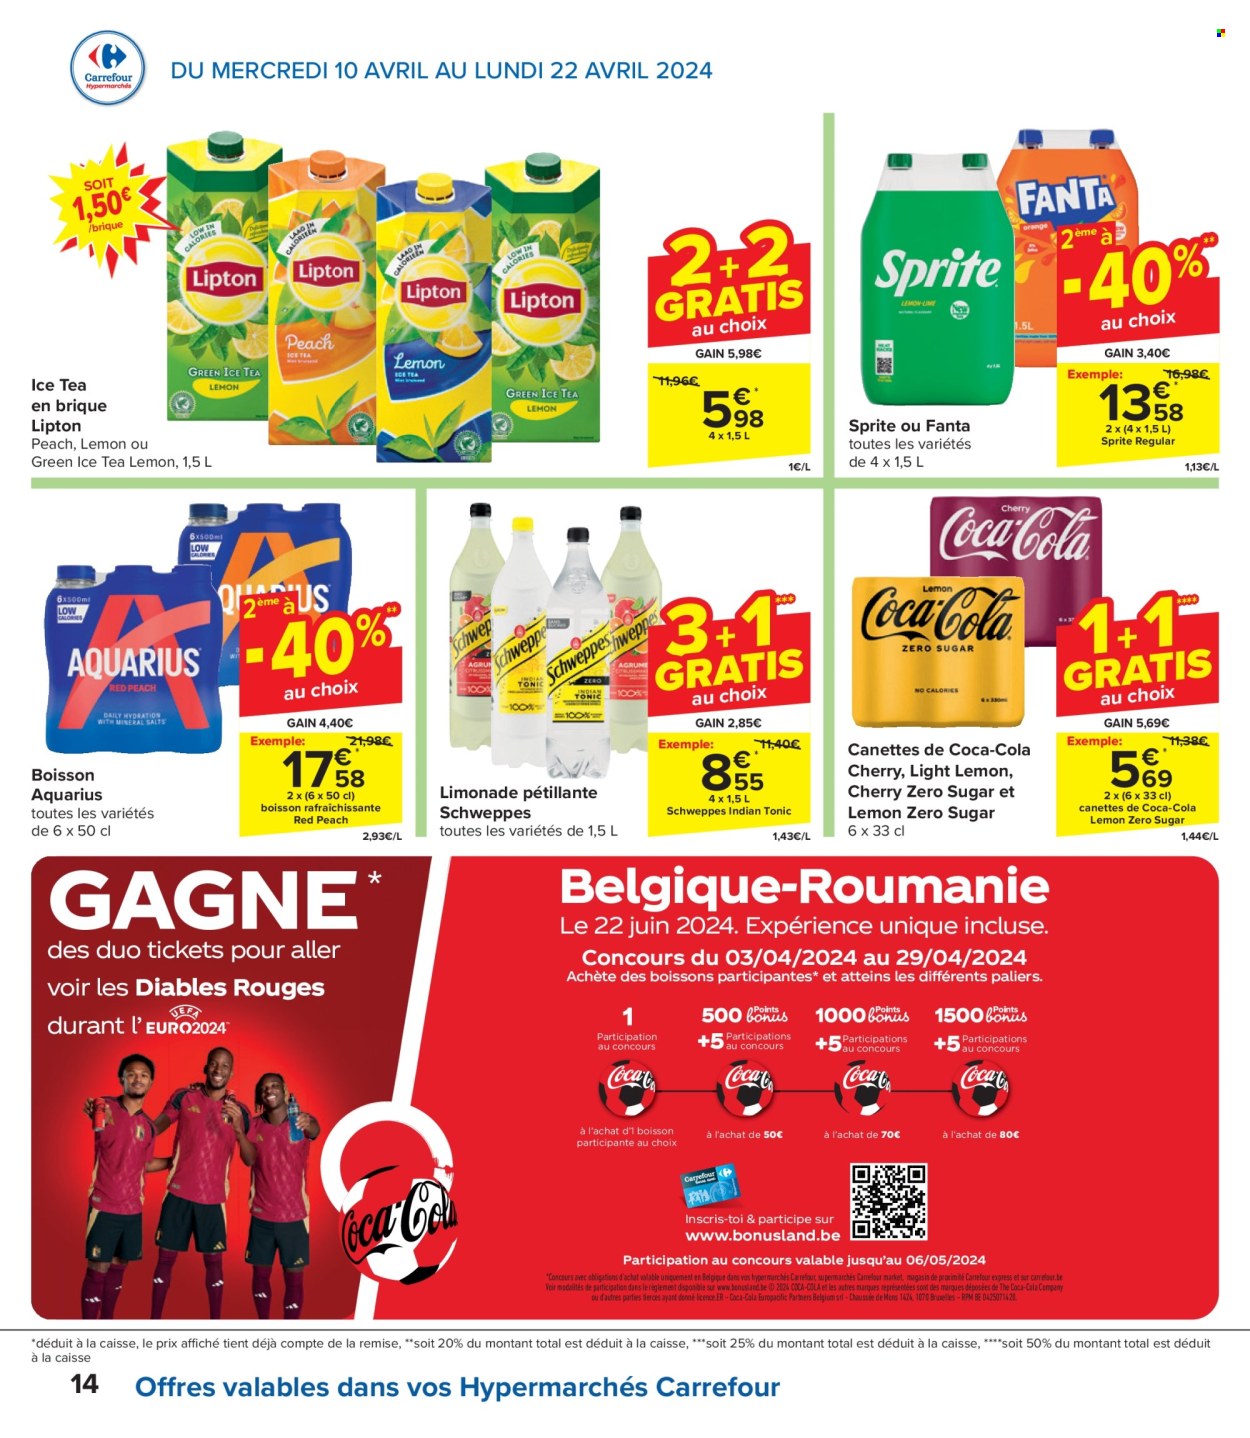 Catalogue Carrefour hypermarkt - 10.4.2024 - 22.4.2024. Page 14.